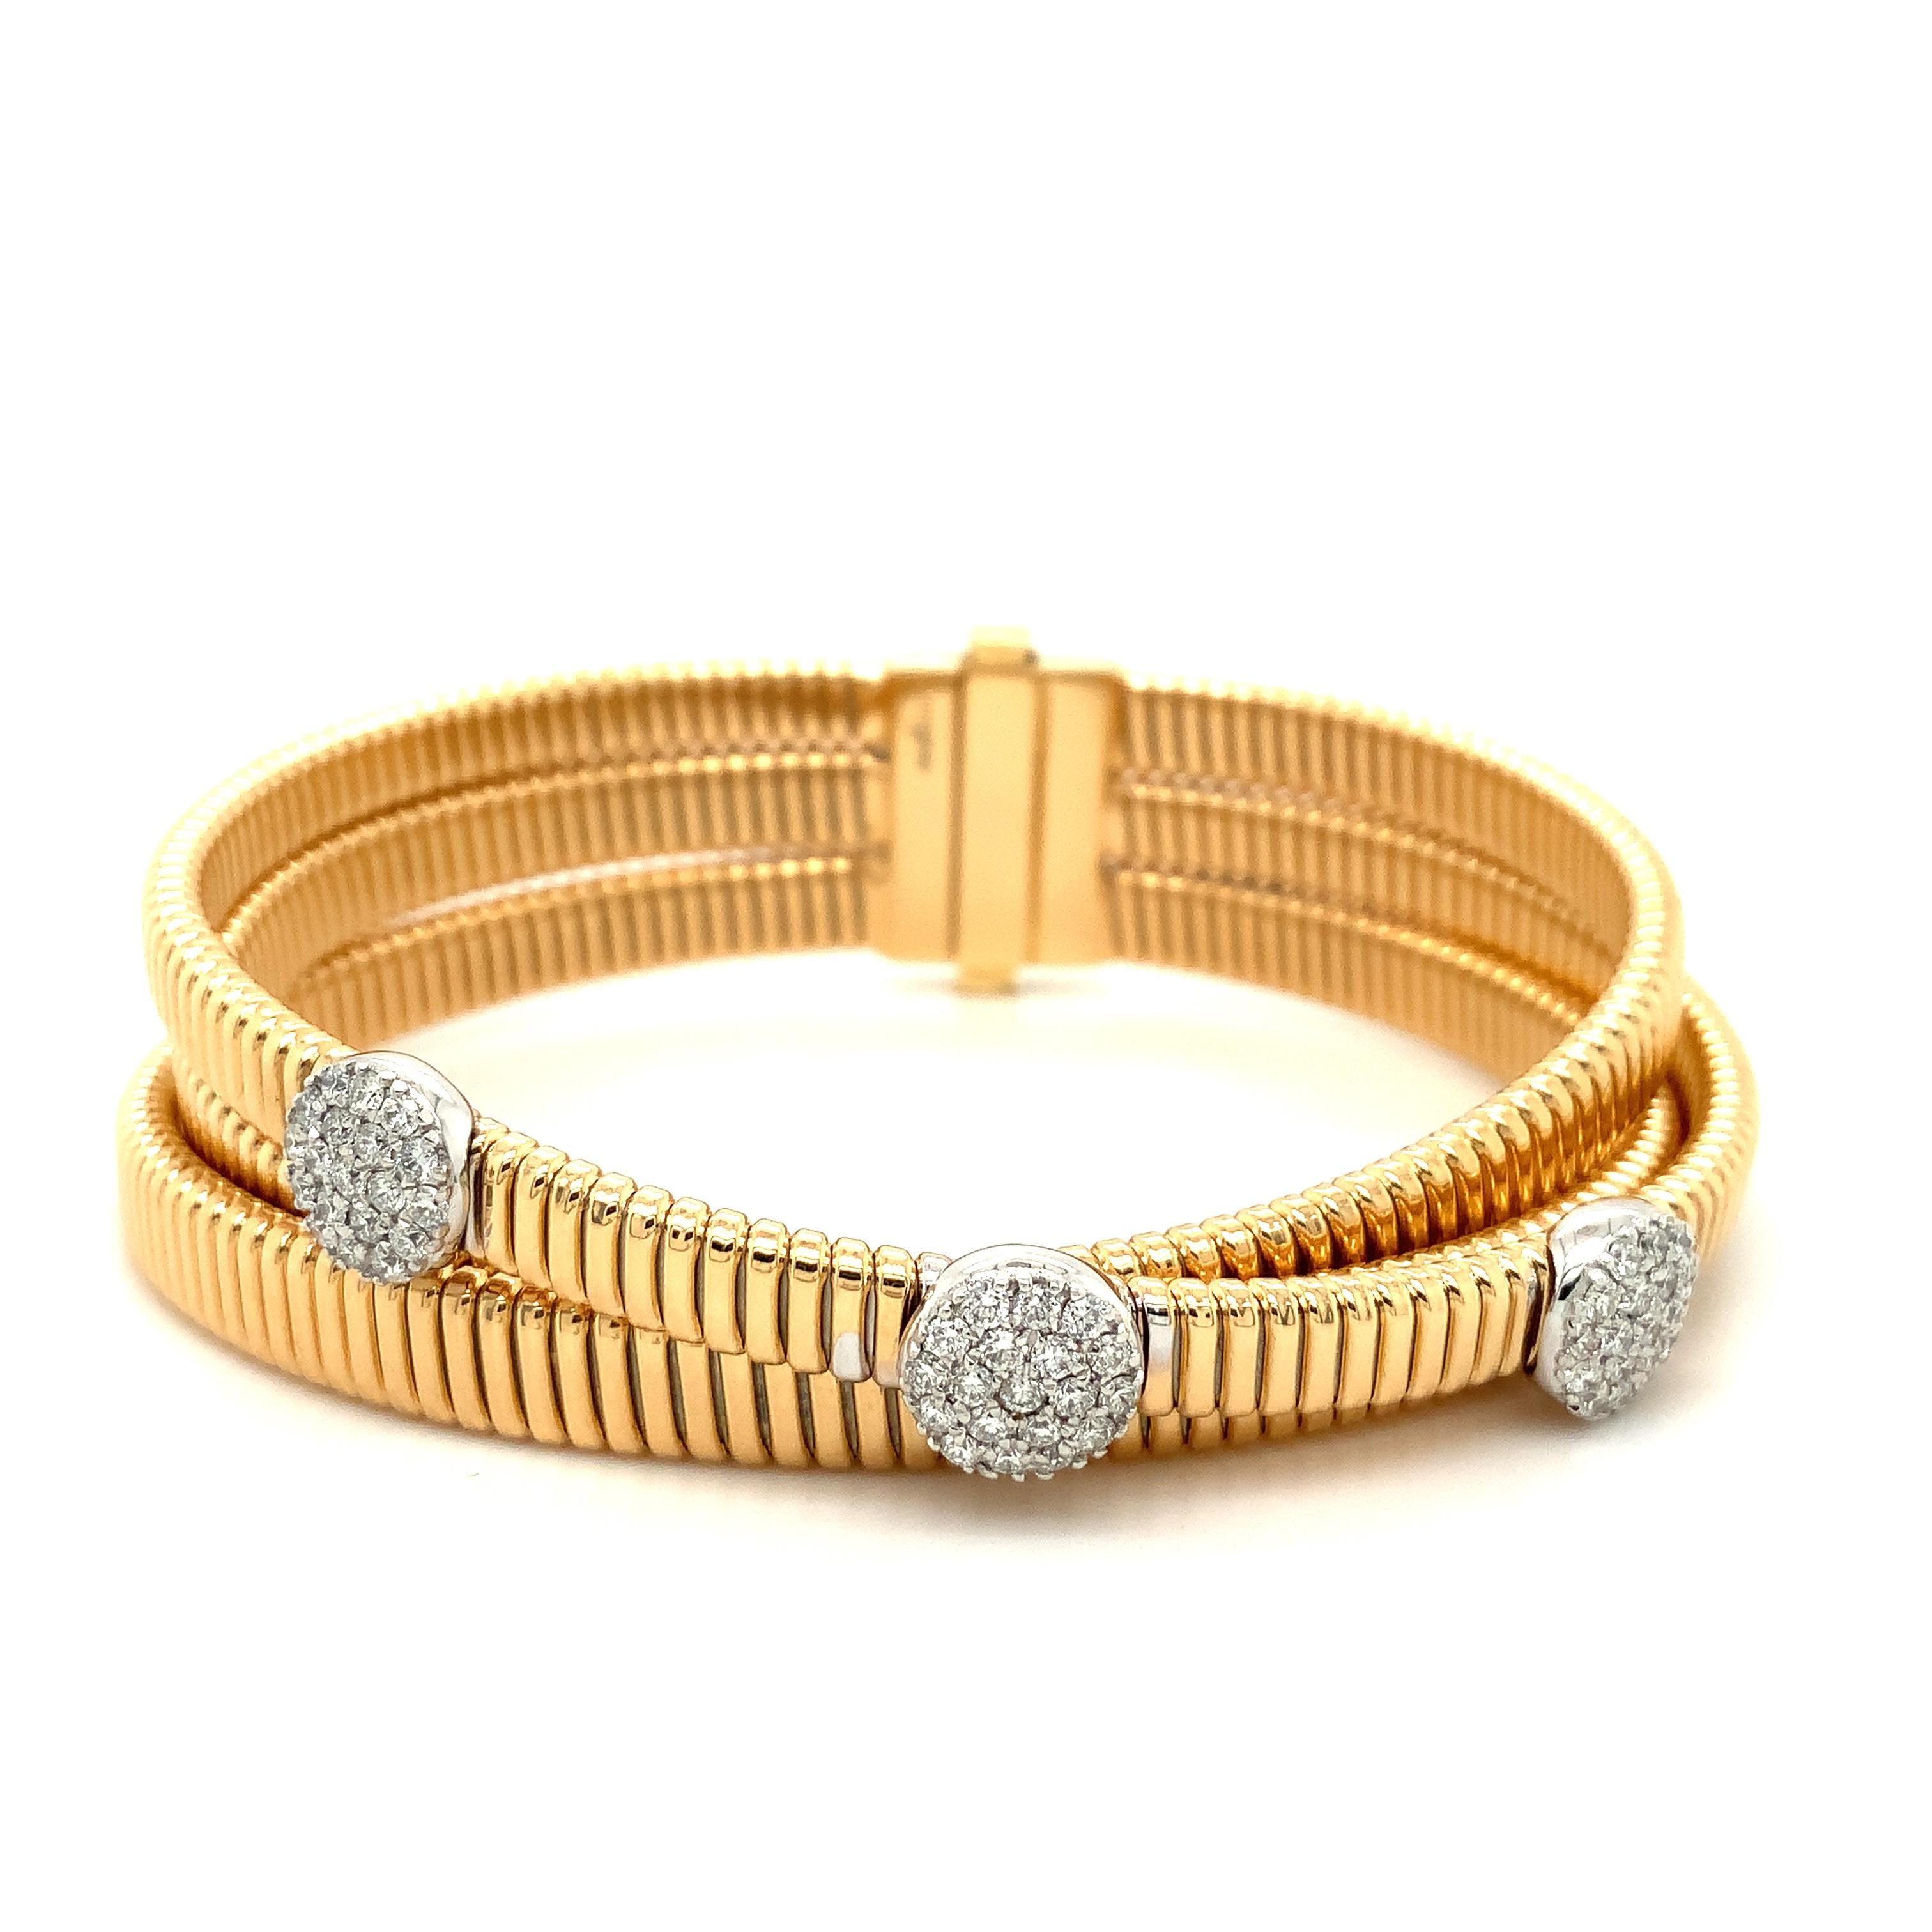 This luxurious, timeless bracelet by Afarin Collection is crafted from 18K yellow and white gold and features an eye-catching triple flexi design with pavé diamonds for a stunning effect. With its delicate and refreshing style, this bracelet is